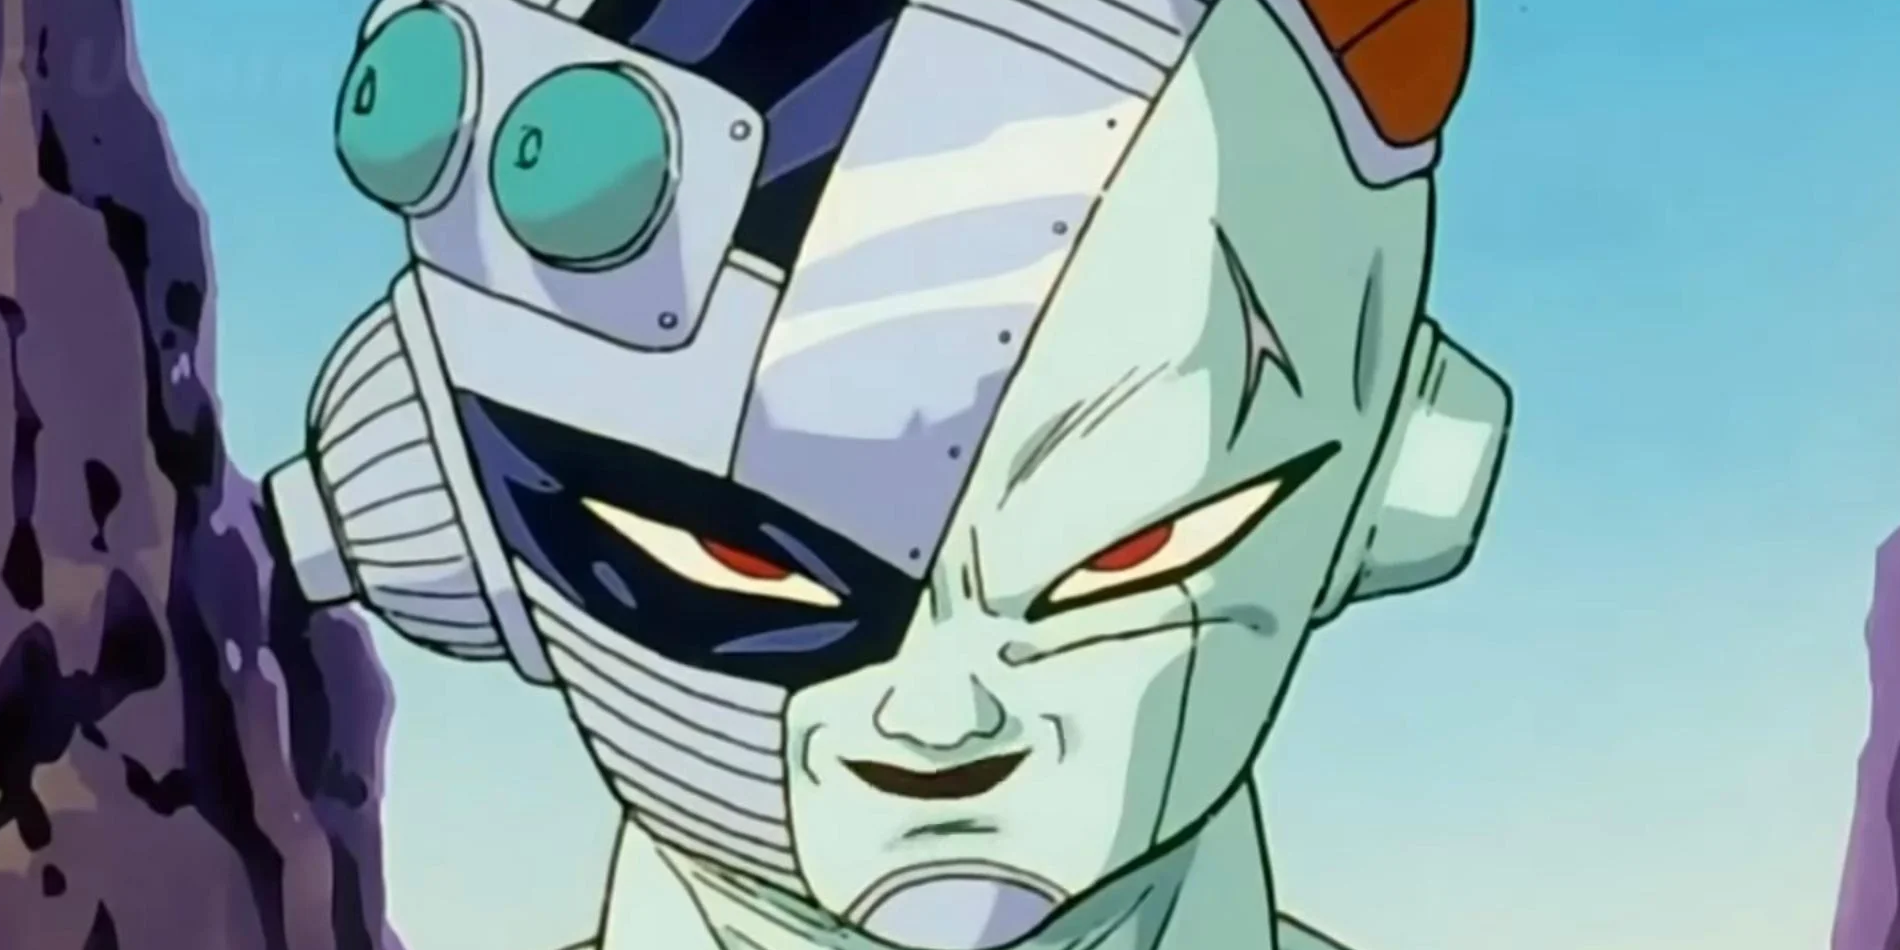 Frieza in his Mecha Form and looking straight ahead.